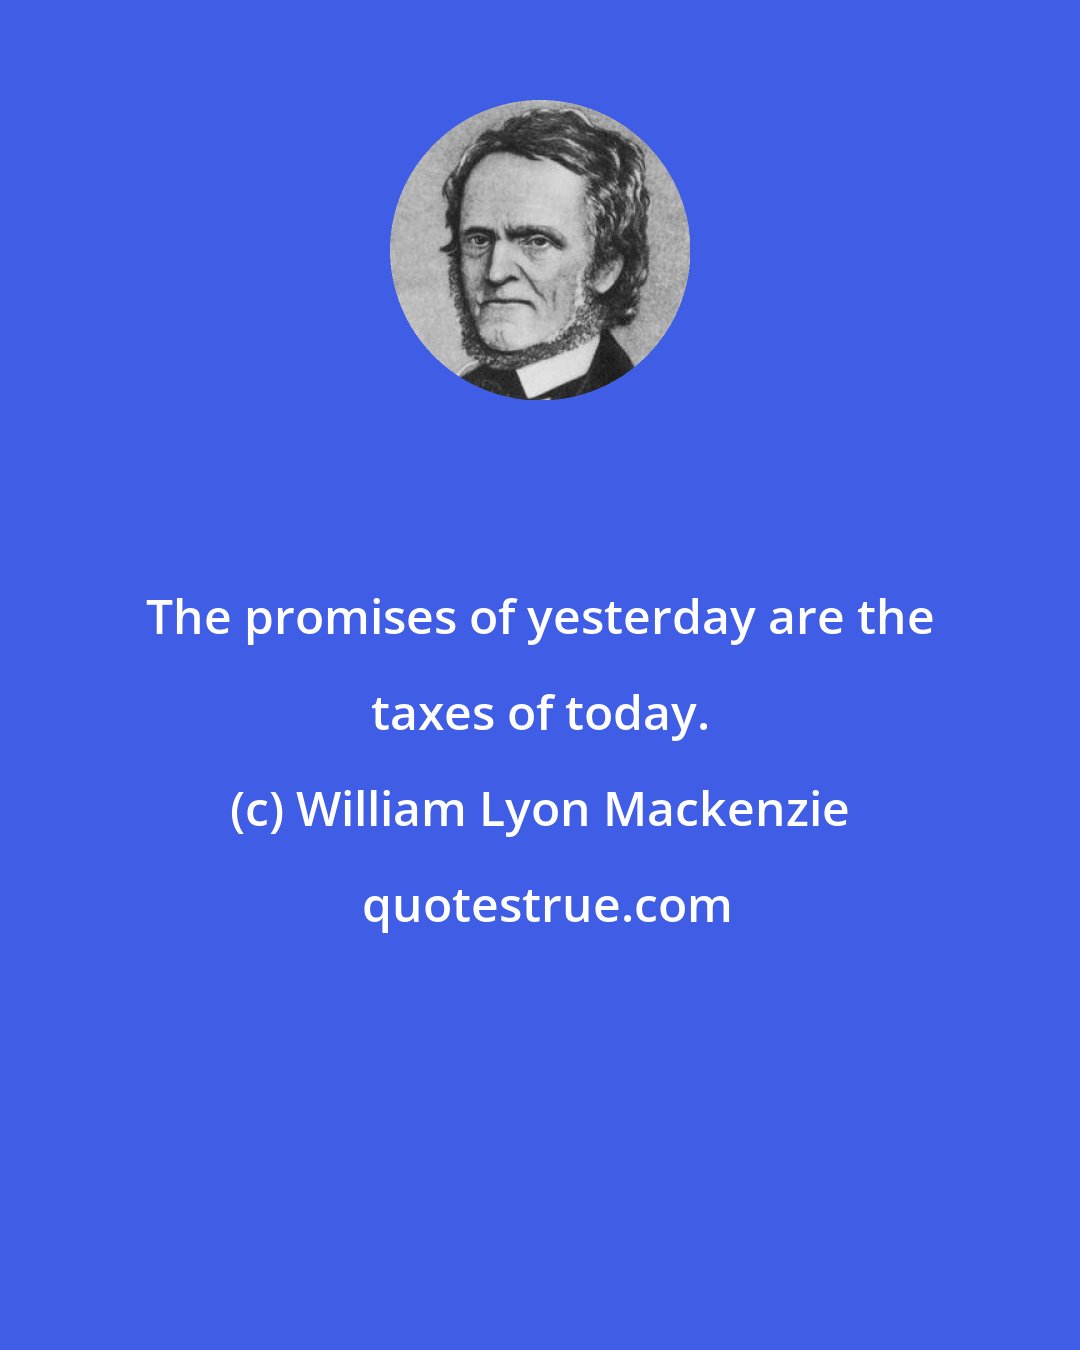 William Lyon Mackenzie: The promises of yesterday are the taxes of today.